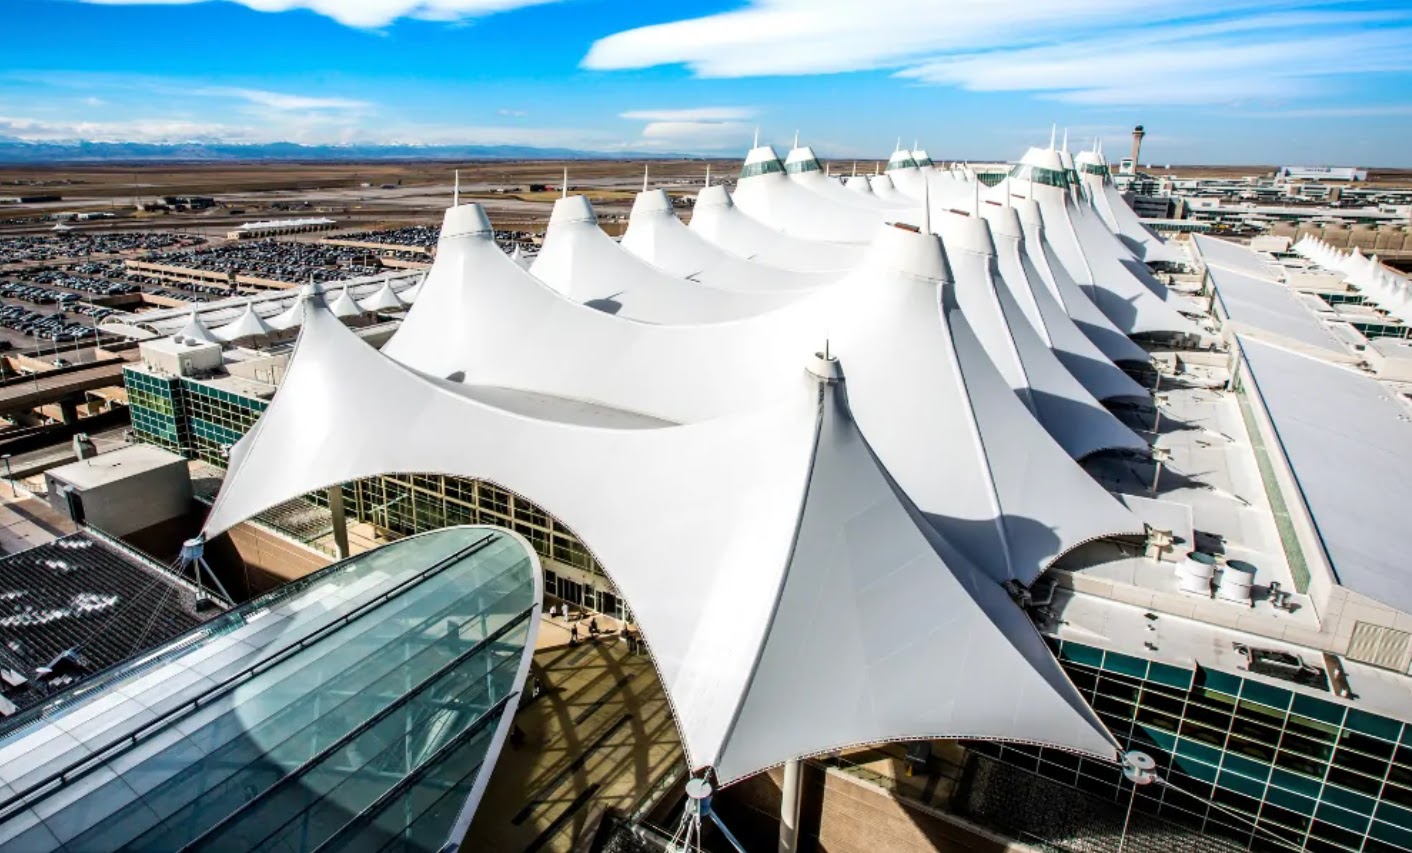 Denver Airport who some believe is home of the new World Order